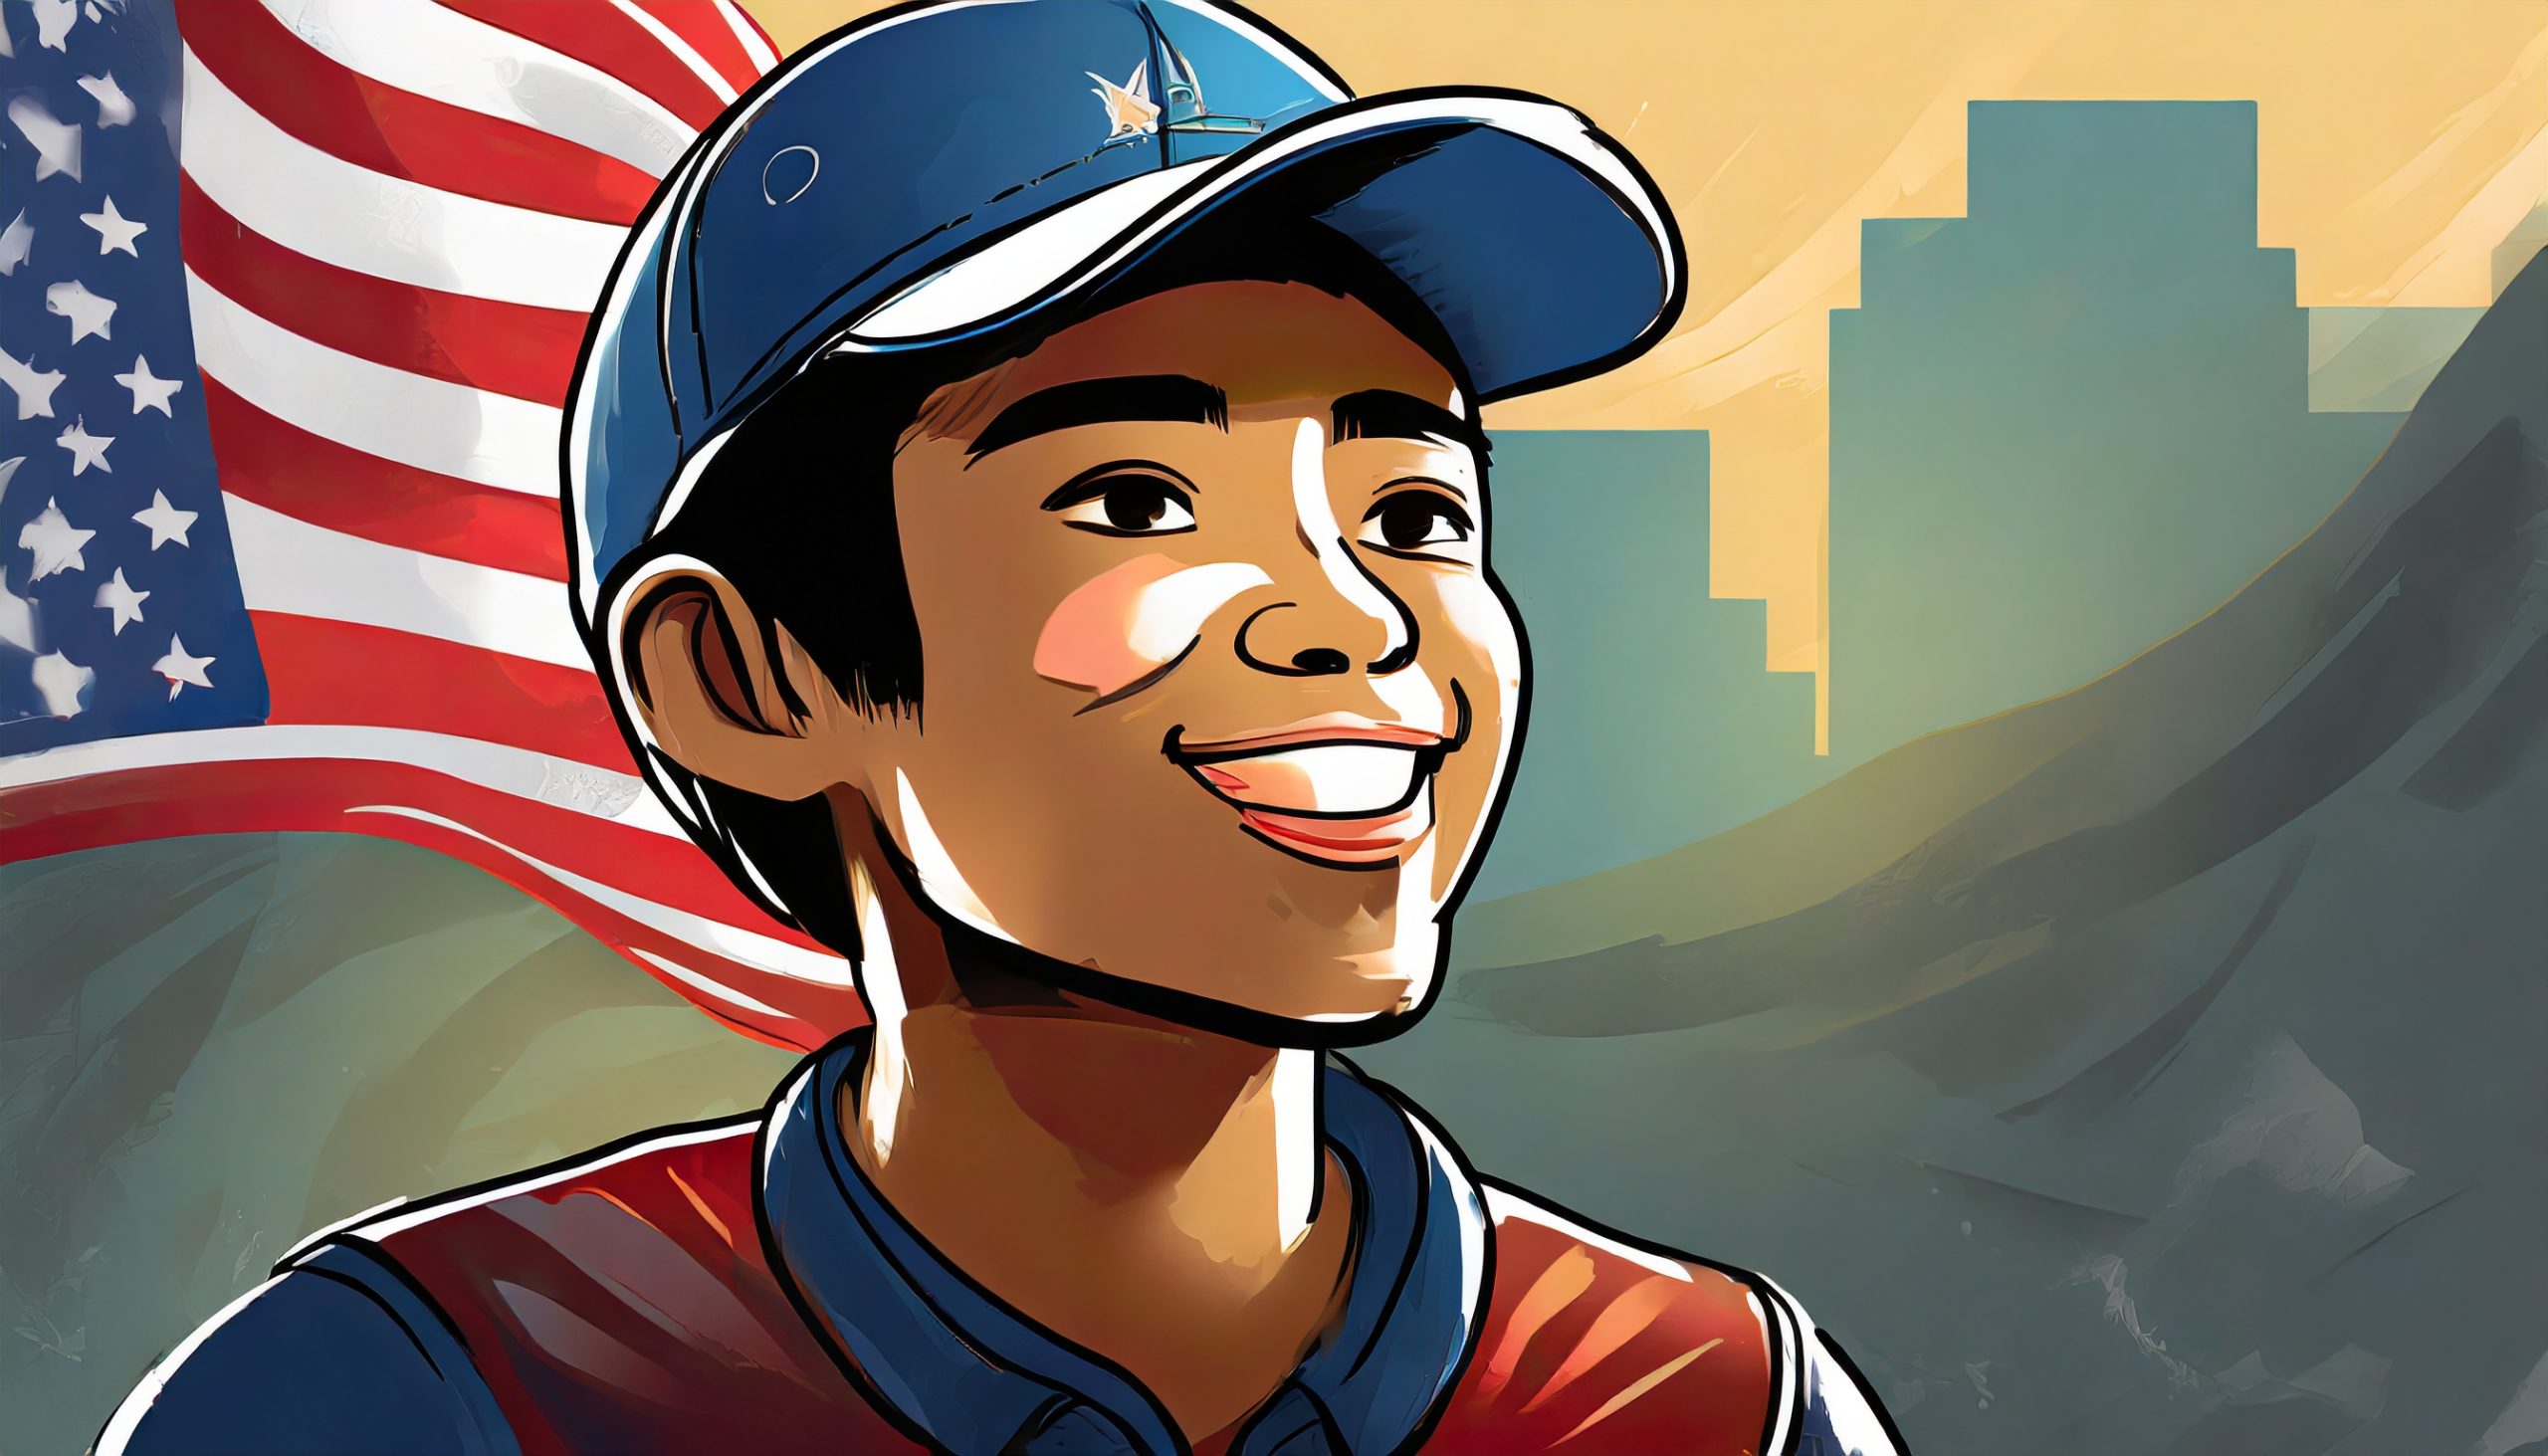 Illustration of a boy growing up in America